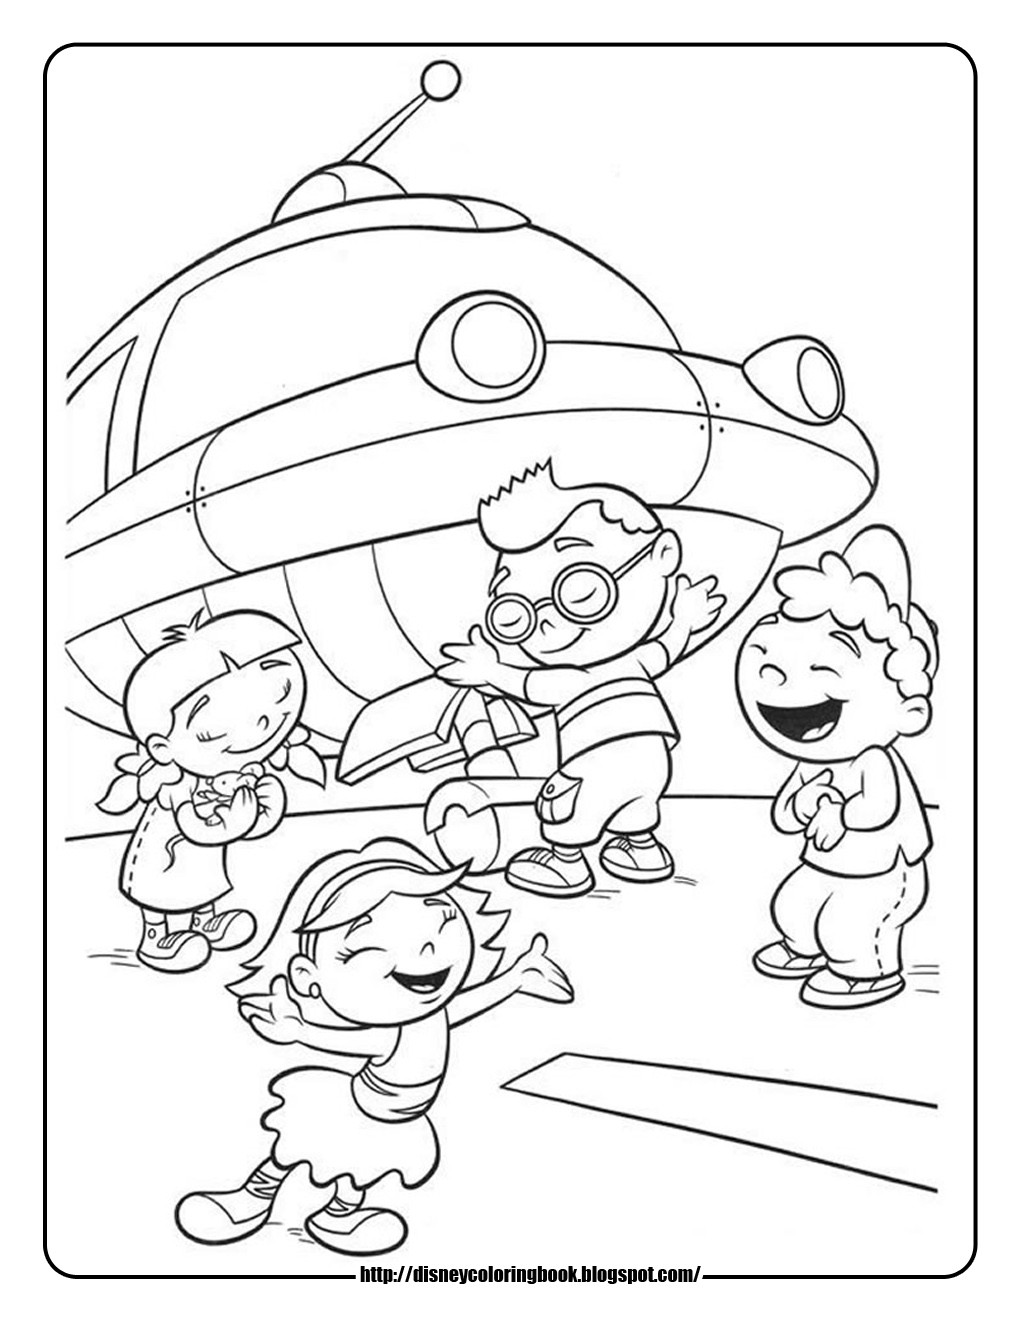 Coloring Sheets For Little Kids
 Disney Coloring Pages and Sheets for Kids Little